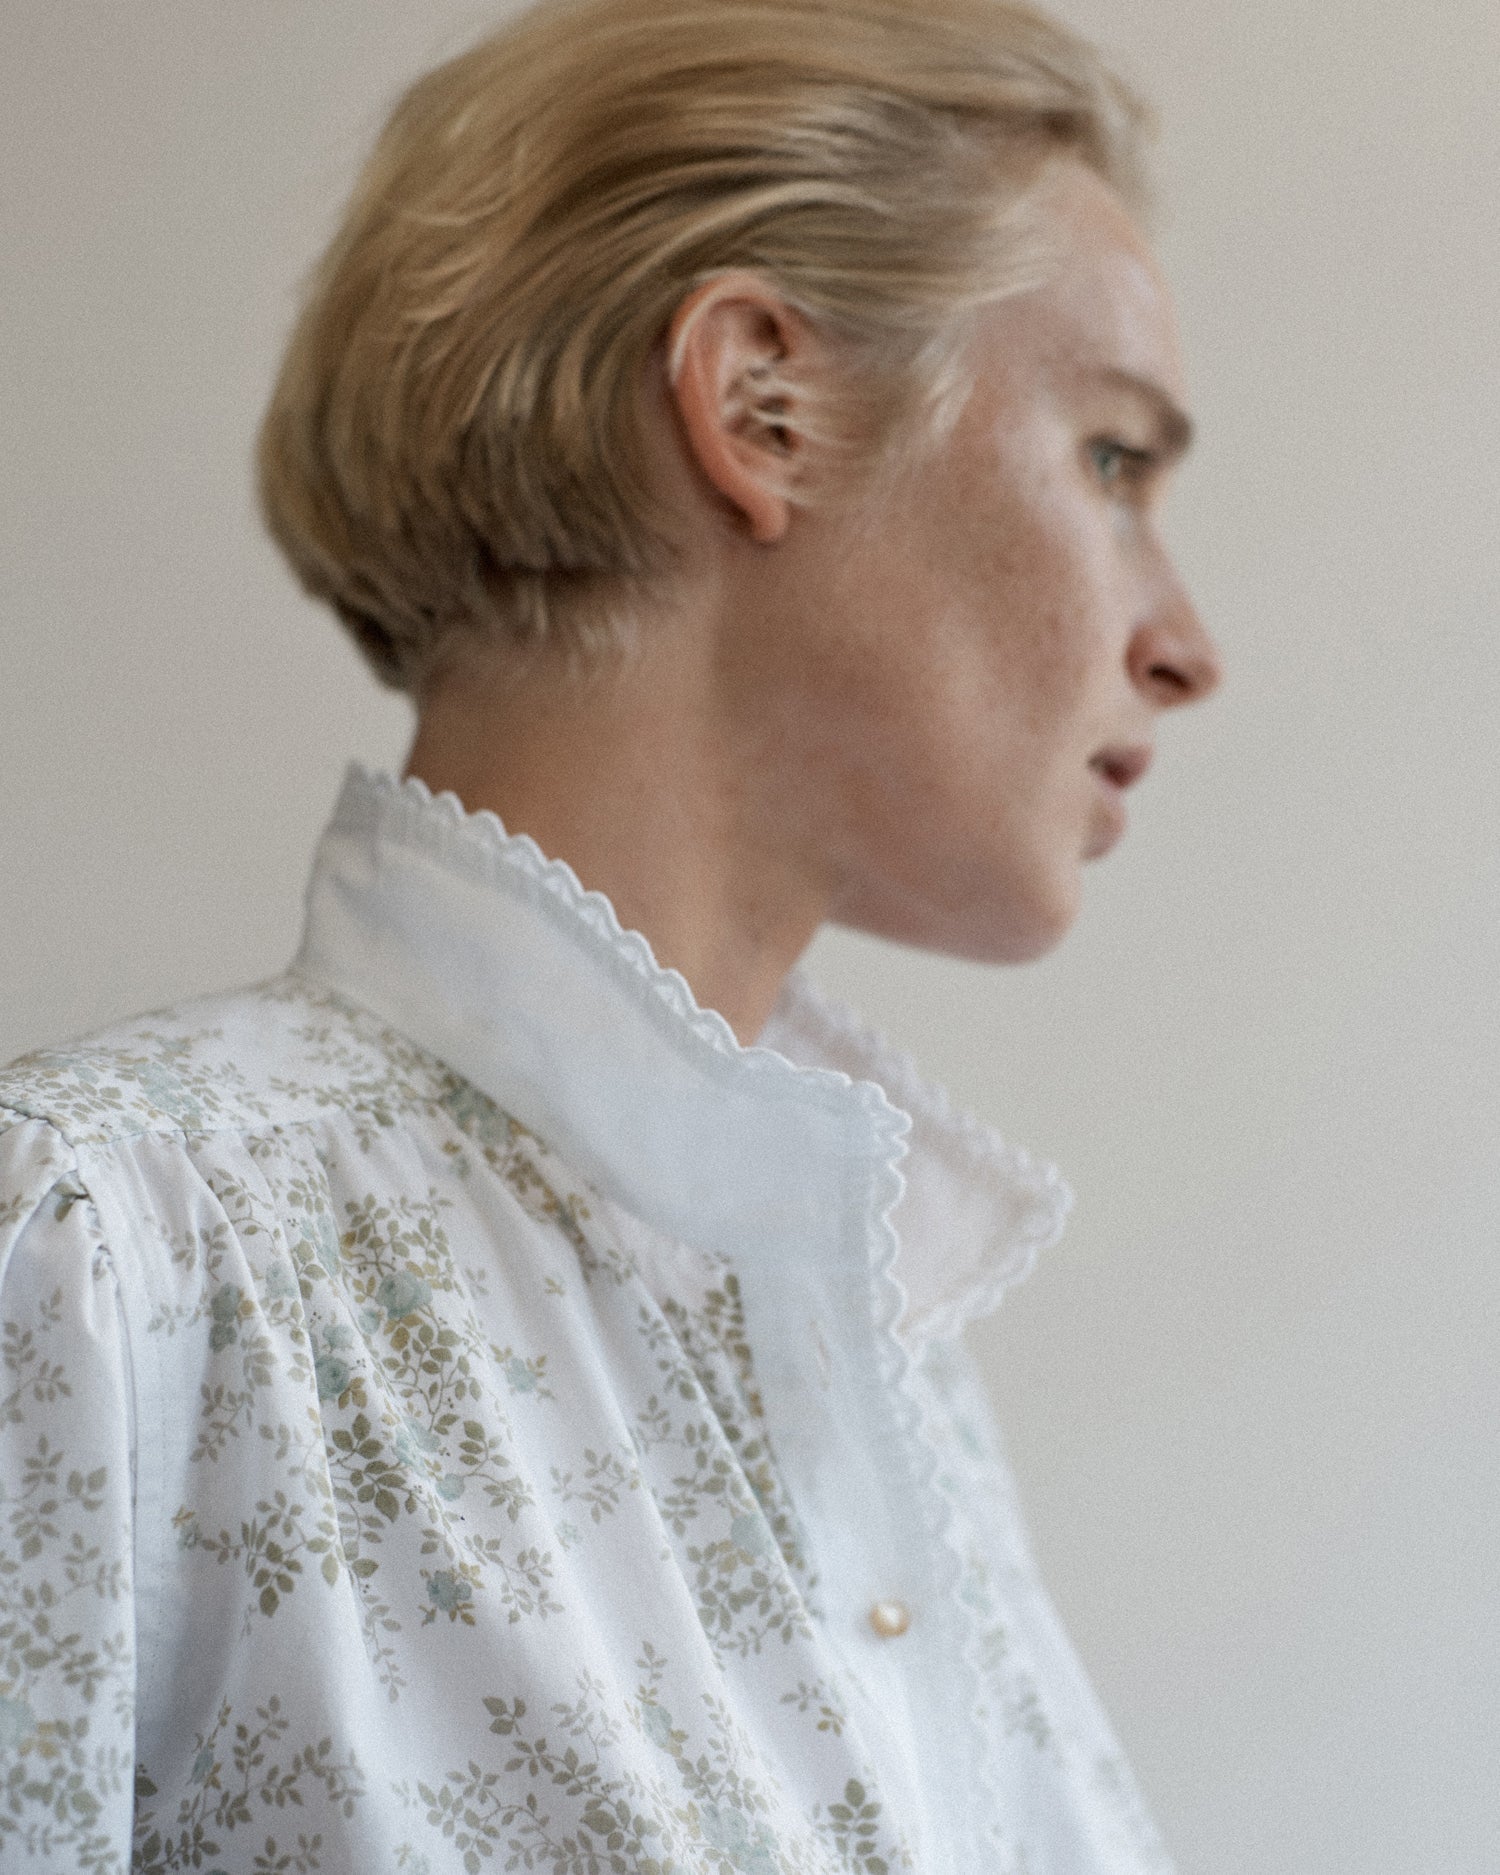 Portrait of a woman's face looking away from camera. She is wearing a floral cotton blouse with eyelet collar trim.